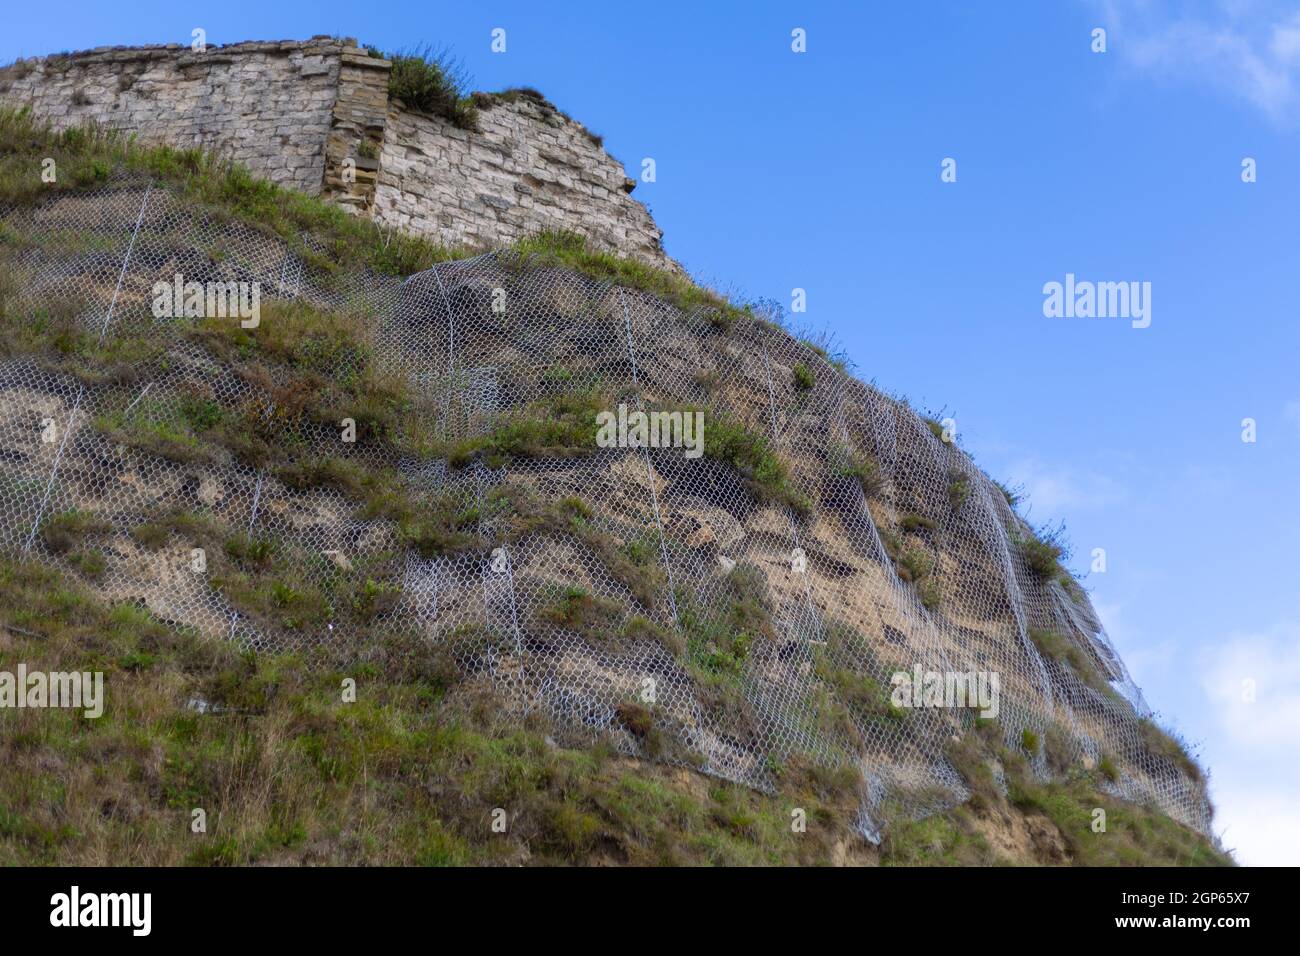 Nets on the headland at Scarborough are used to stop falling rocks. Stock Photo